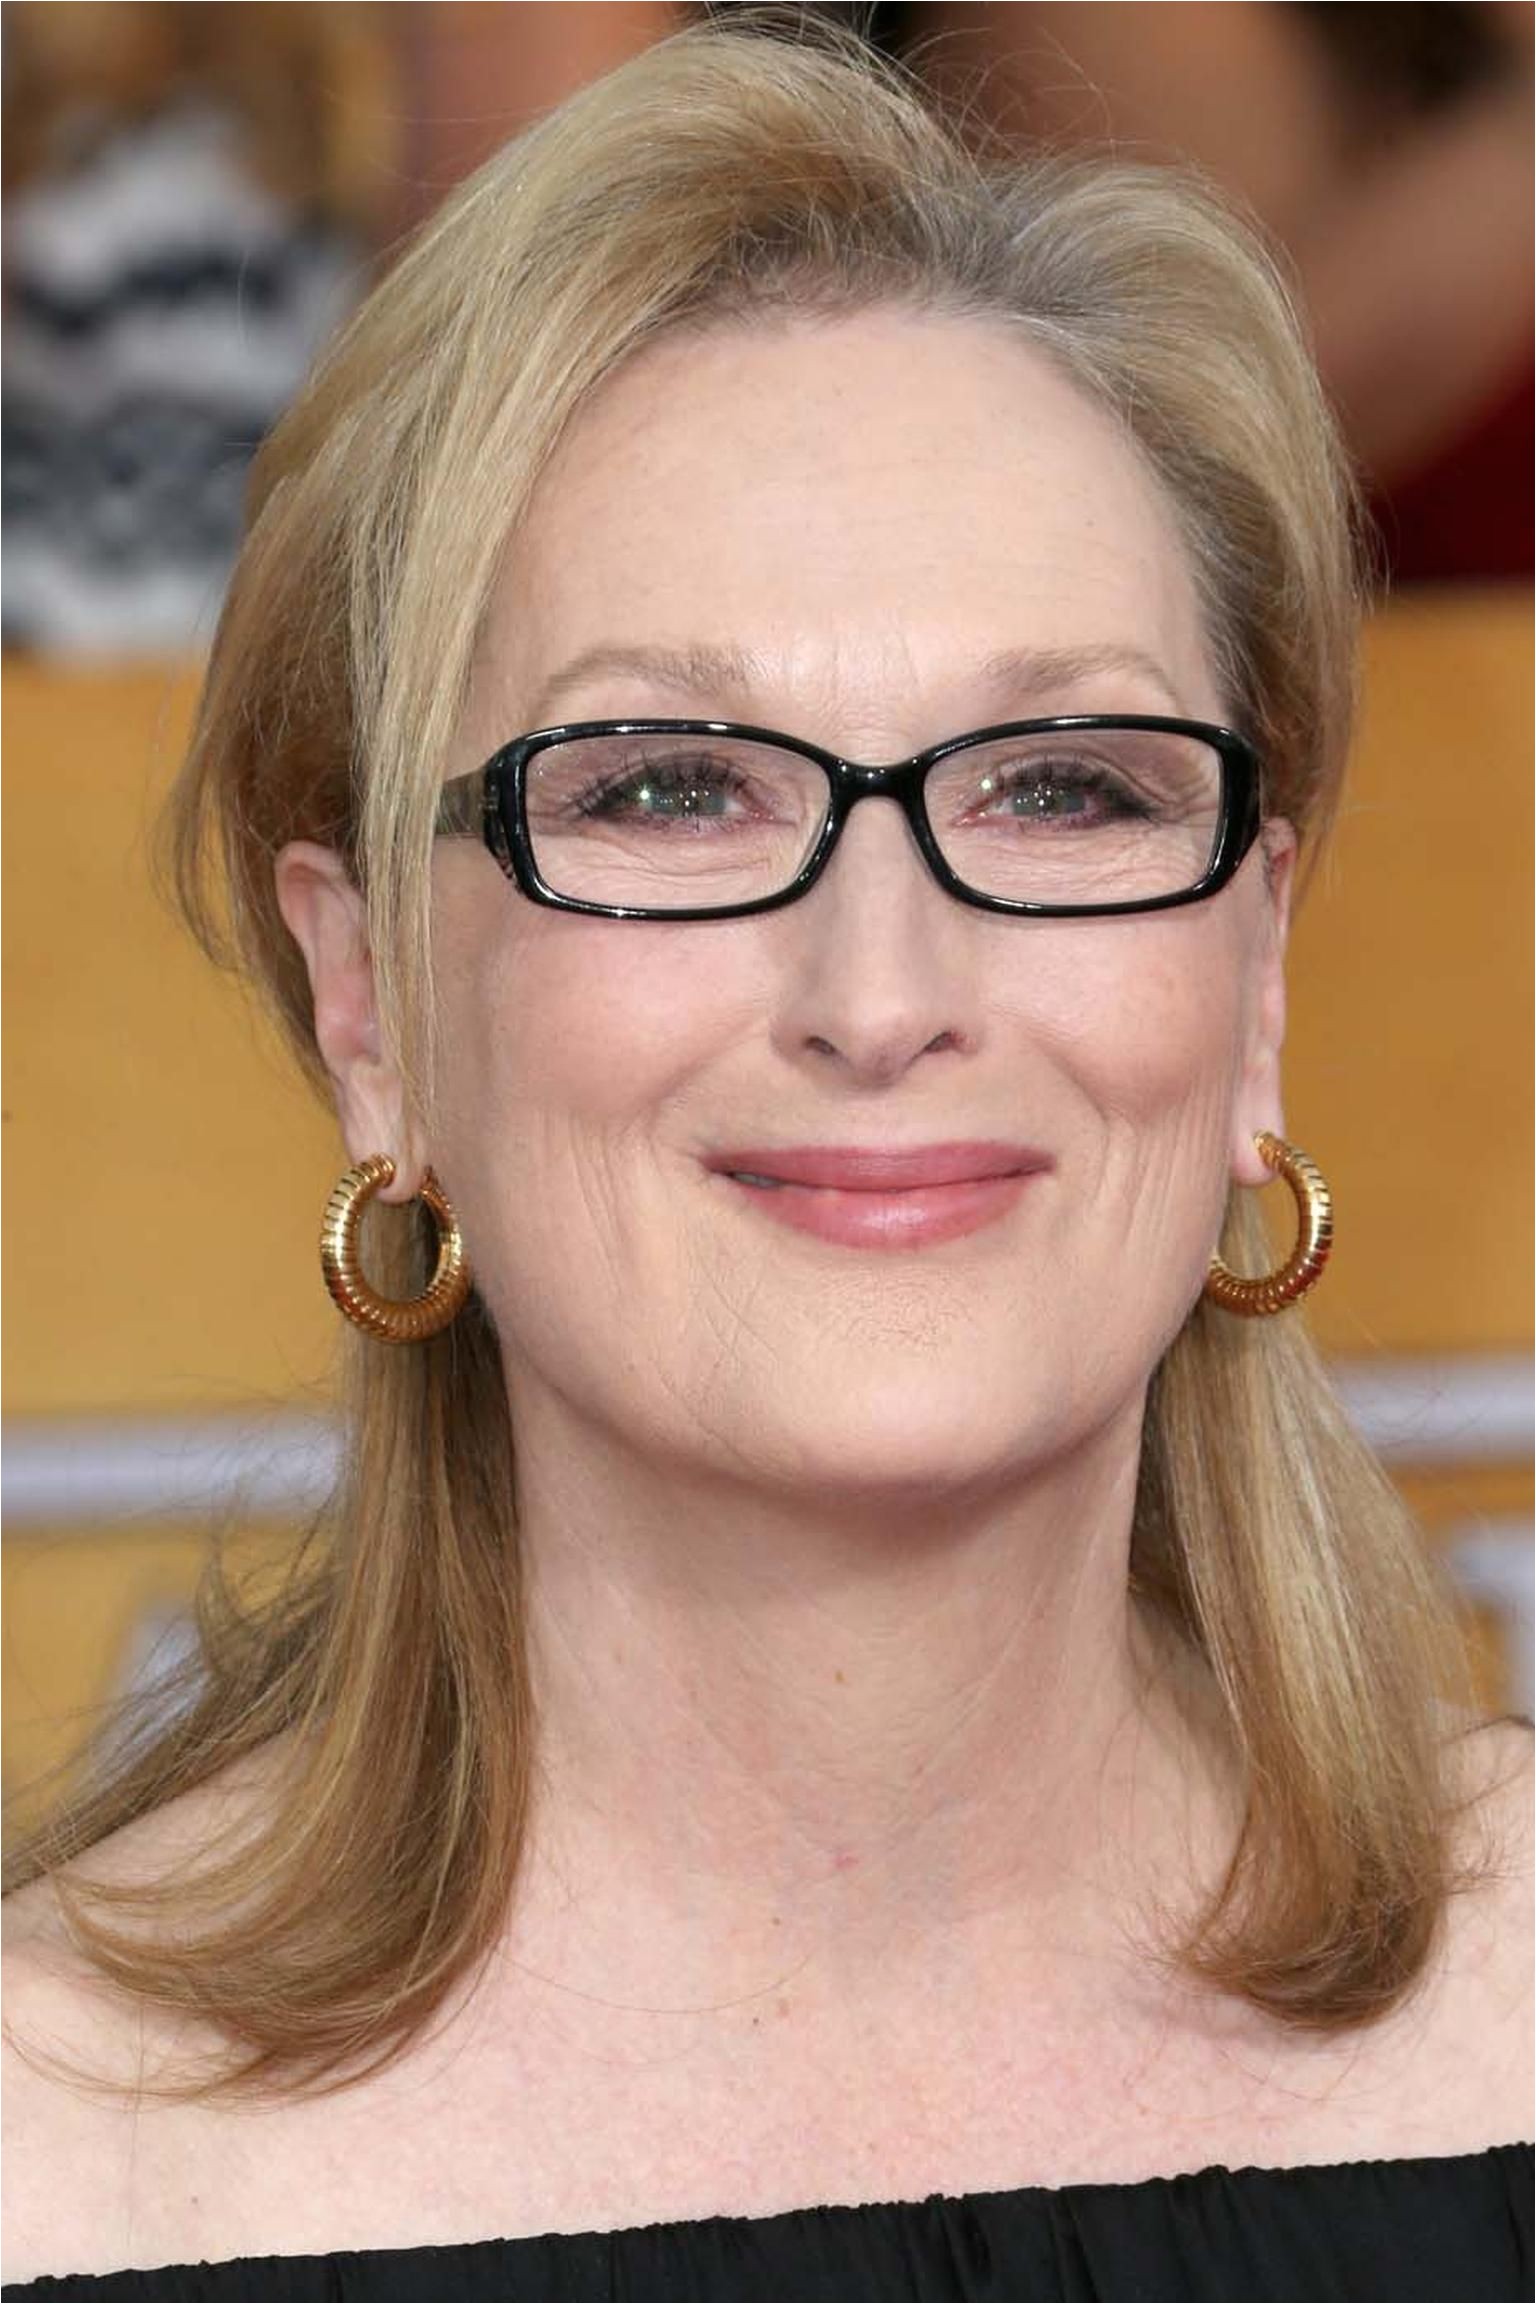 15 Hairstyles for Women Over 50 With Glasses